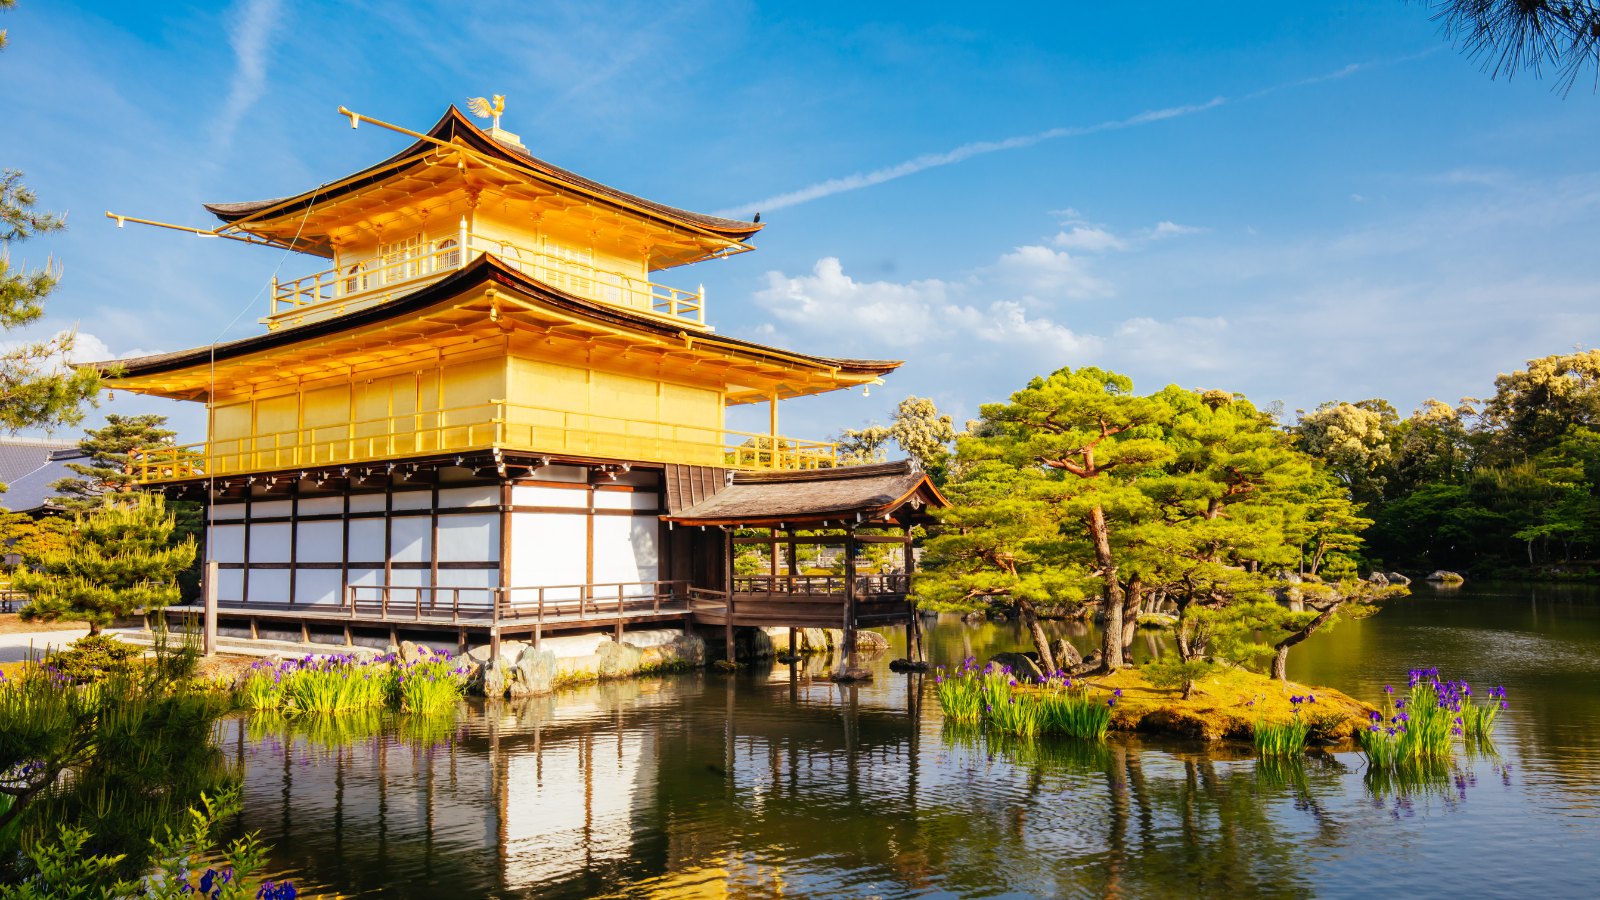 <p>Japan’s blend of ancient traditions and cutting-edge technology makes it a fascinating destination for Americans wanting to immerse themselves in a unique cultural experience.</p>